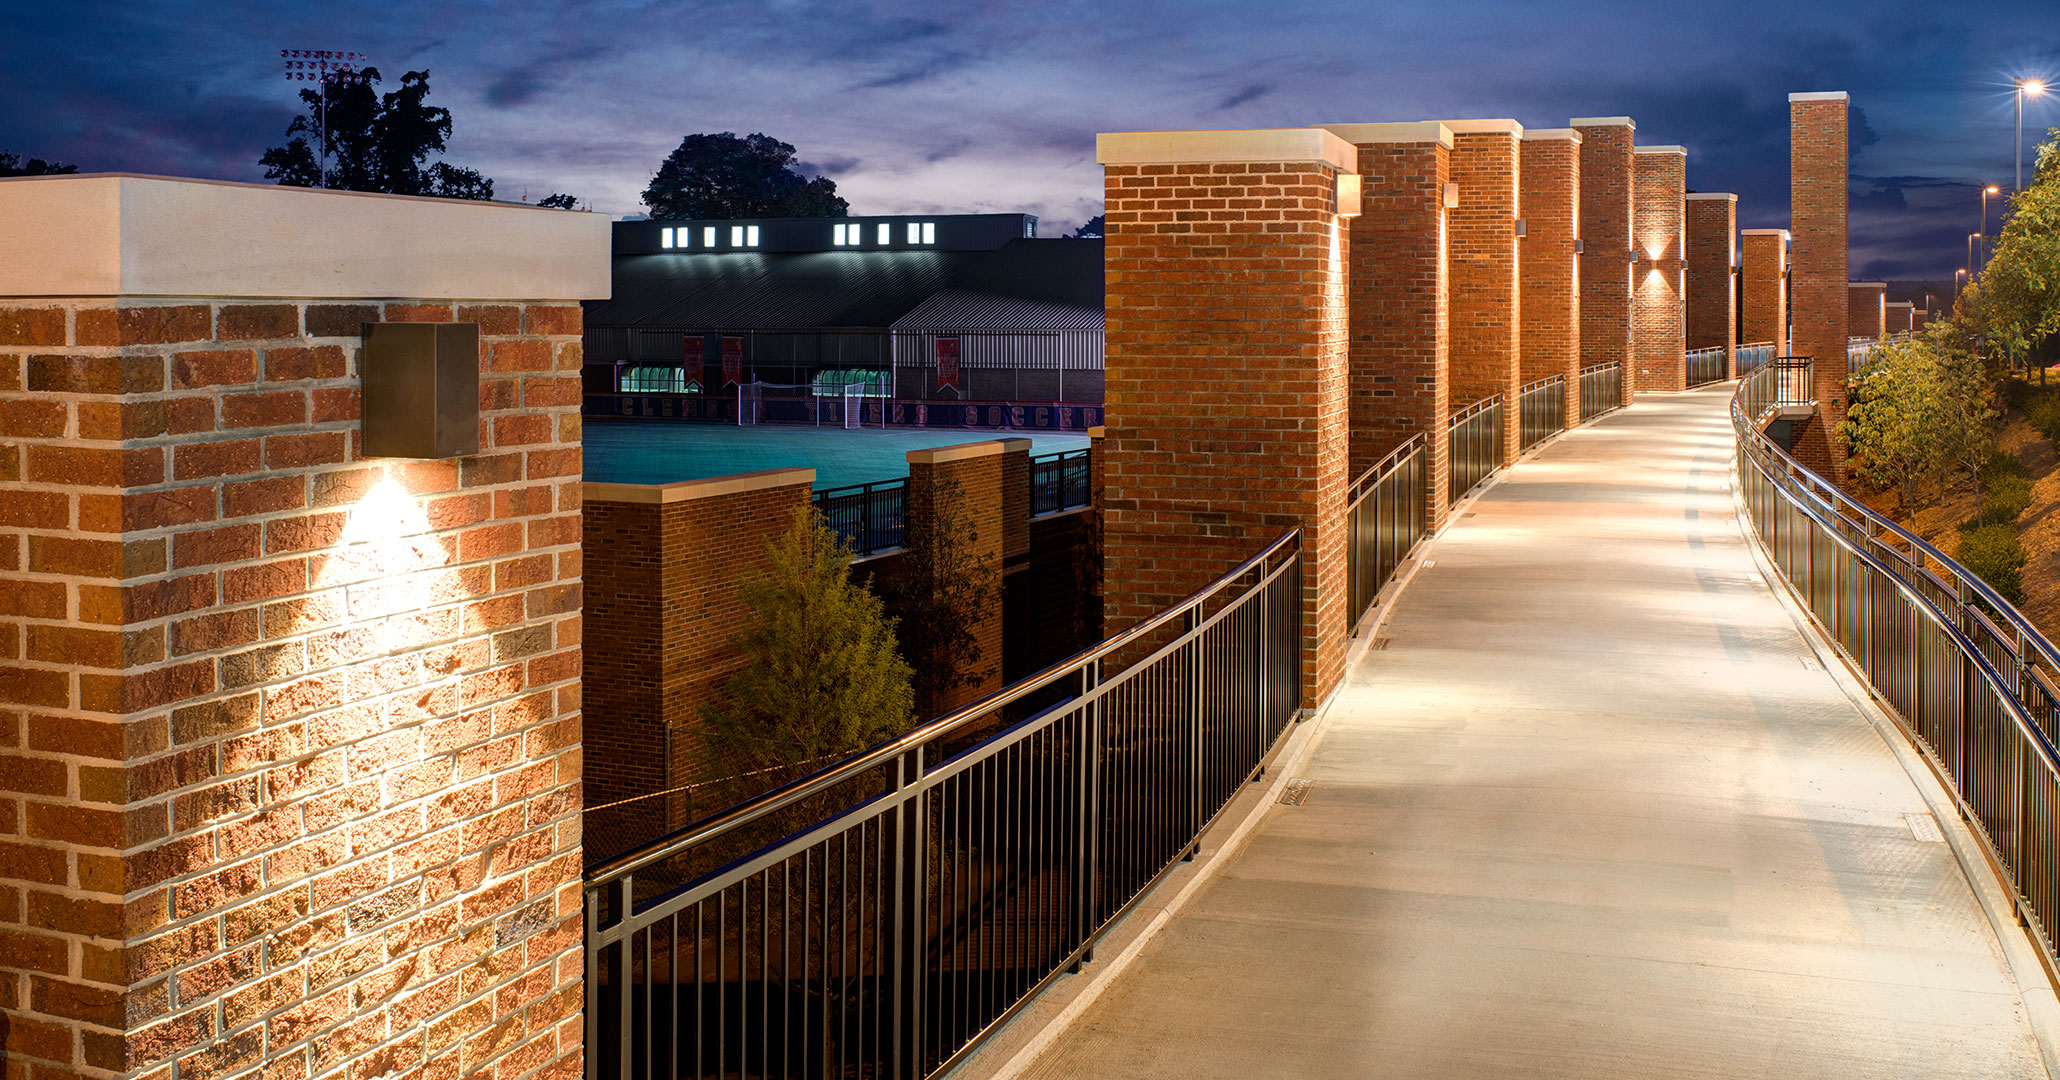 Clemson University hired Boudreaux architects to build a student walkway.